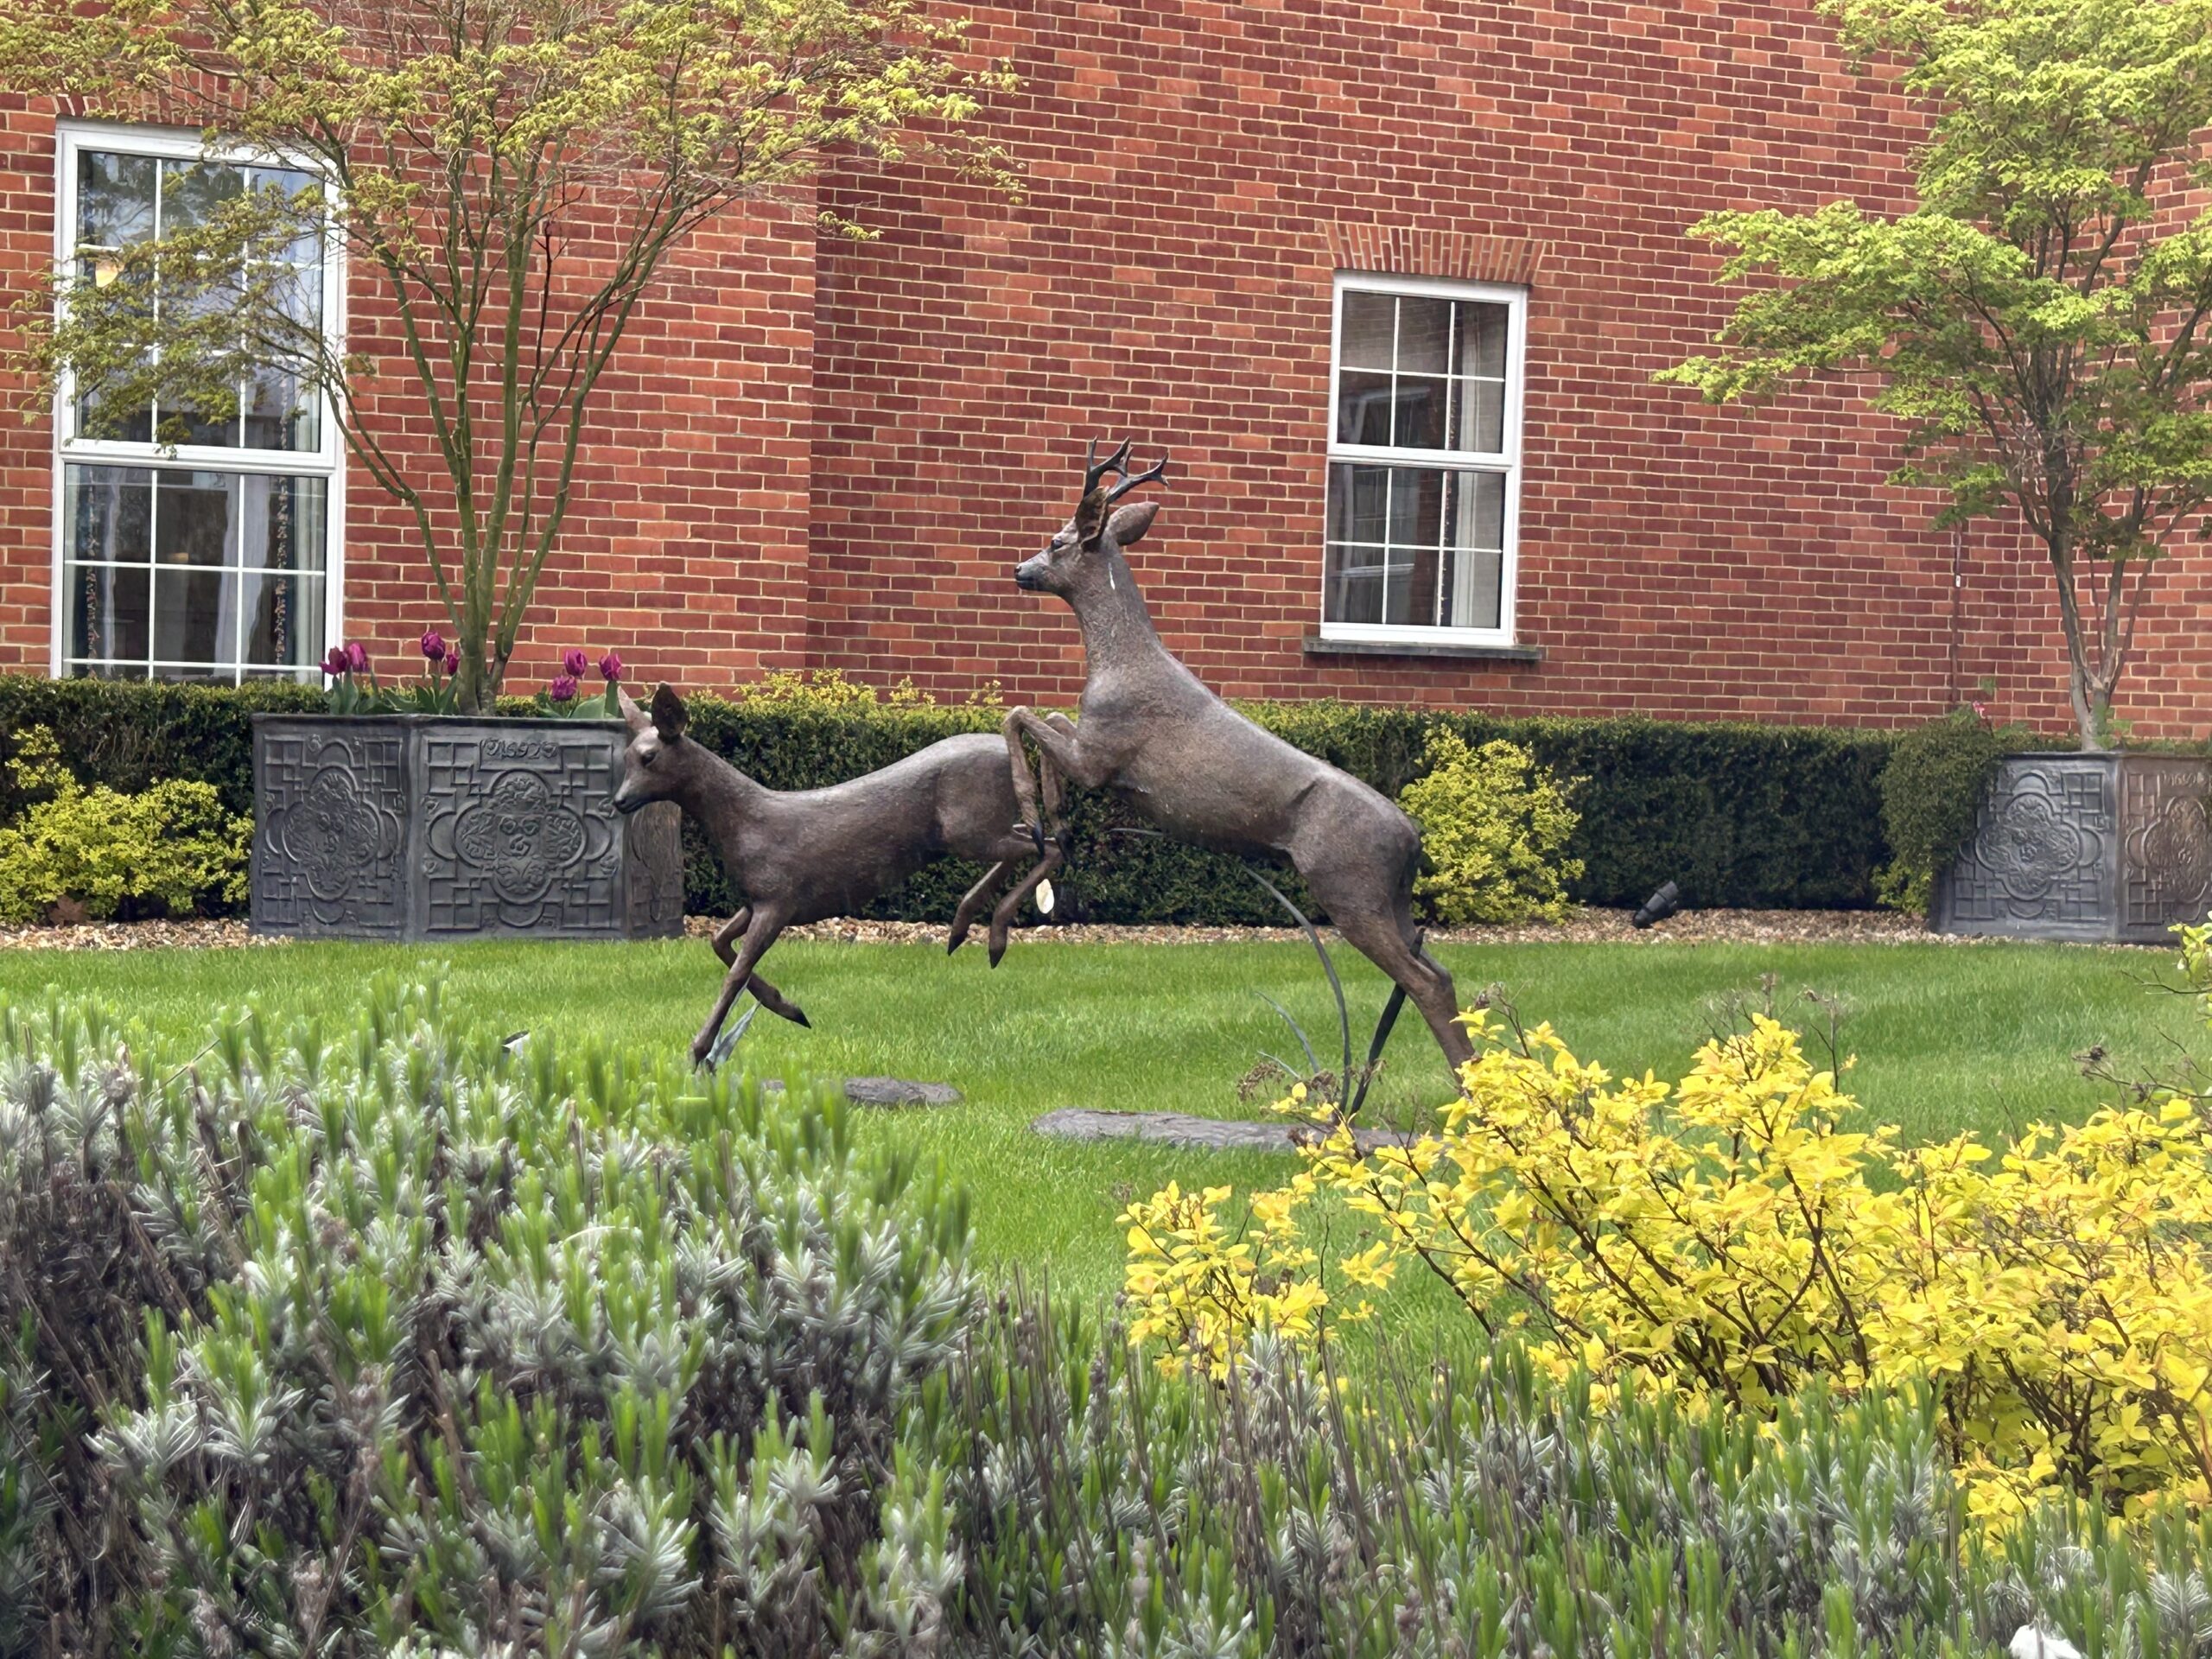 Leaping Deer from The Sculpture Park at Four Seasons Hotel